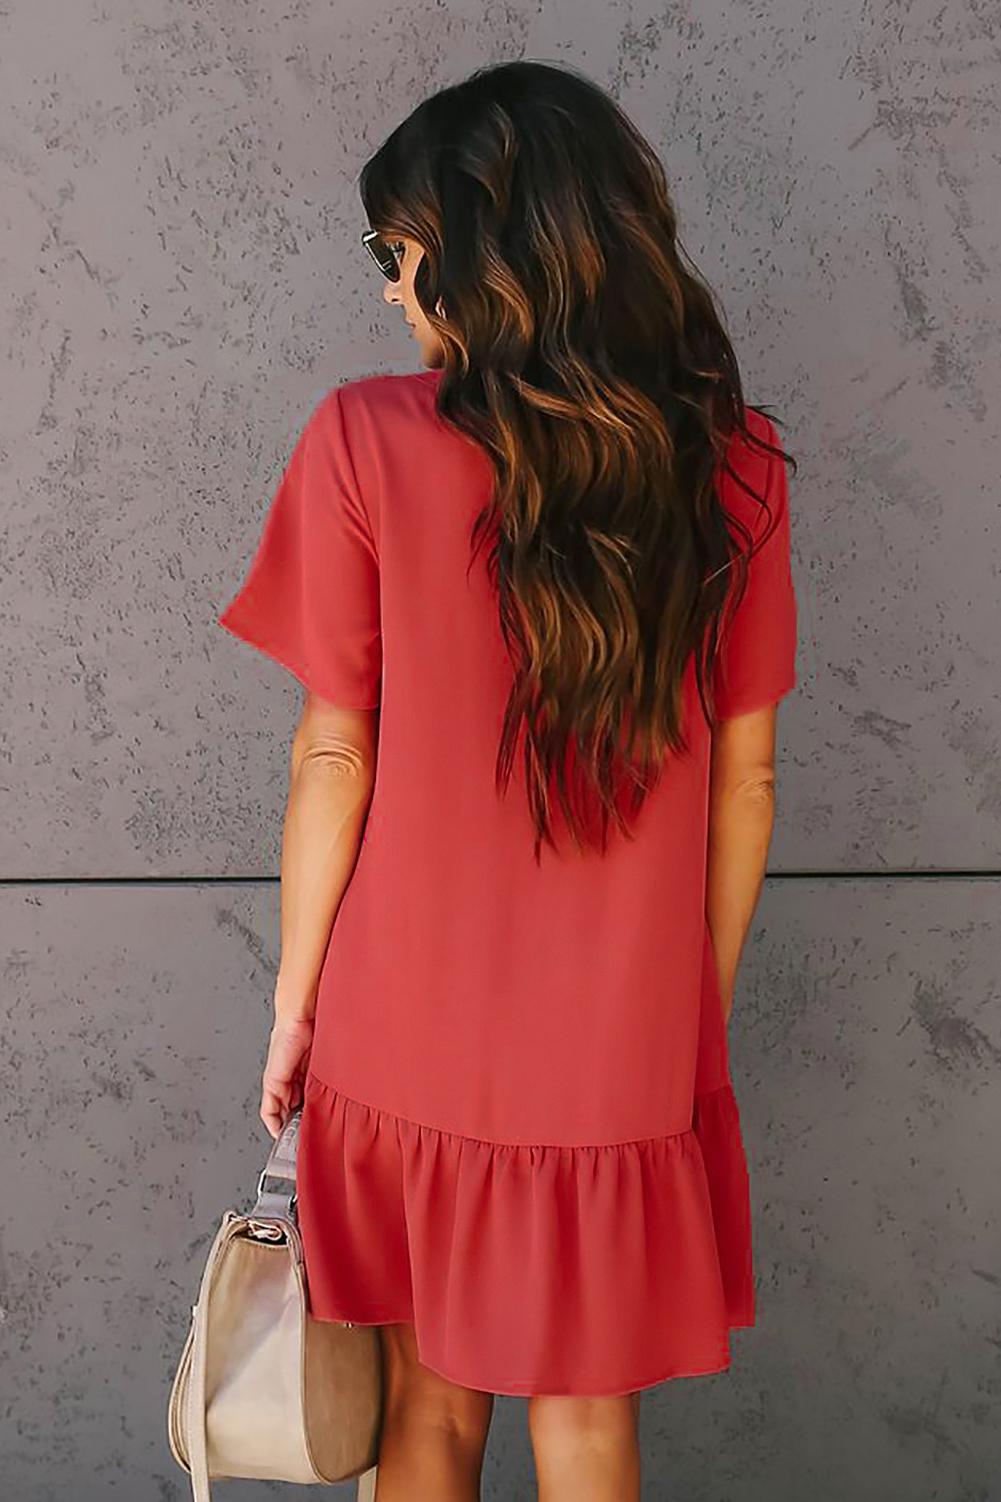 red button down dress